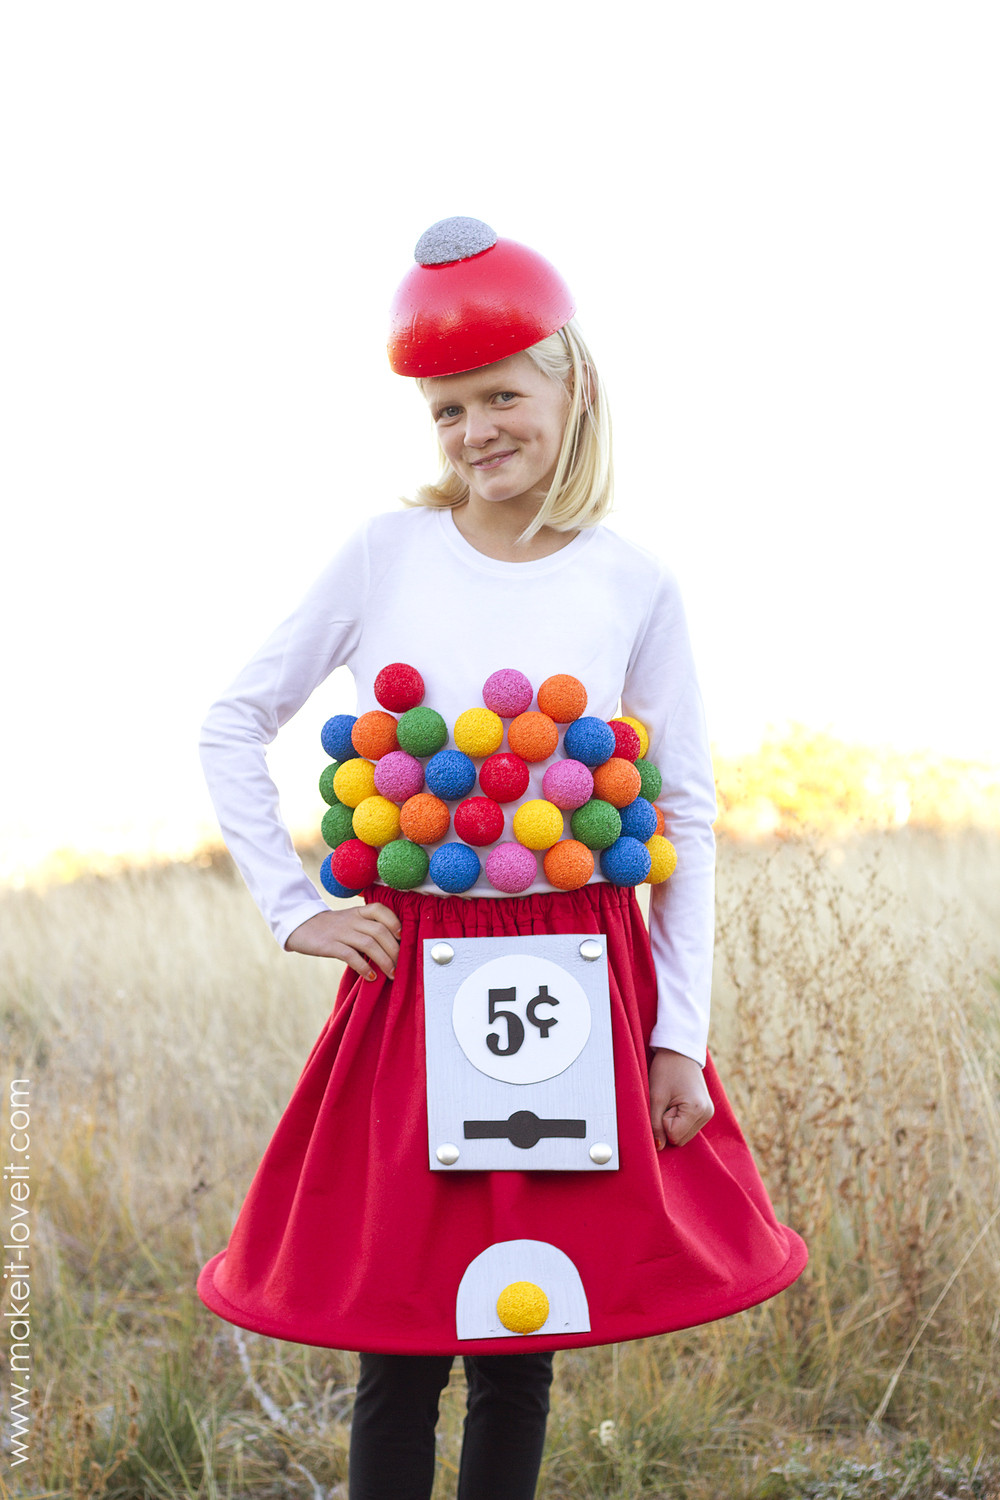 DIY Costumes Ideas For Adults
 36 SIMPLE COSTUME IDEAS for Kids and Adults